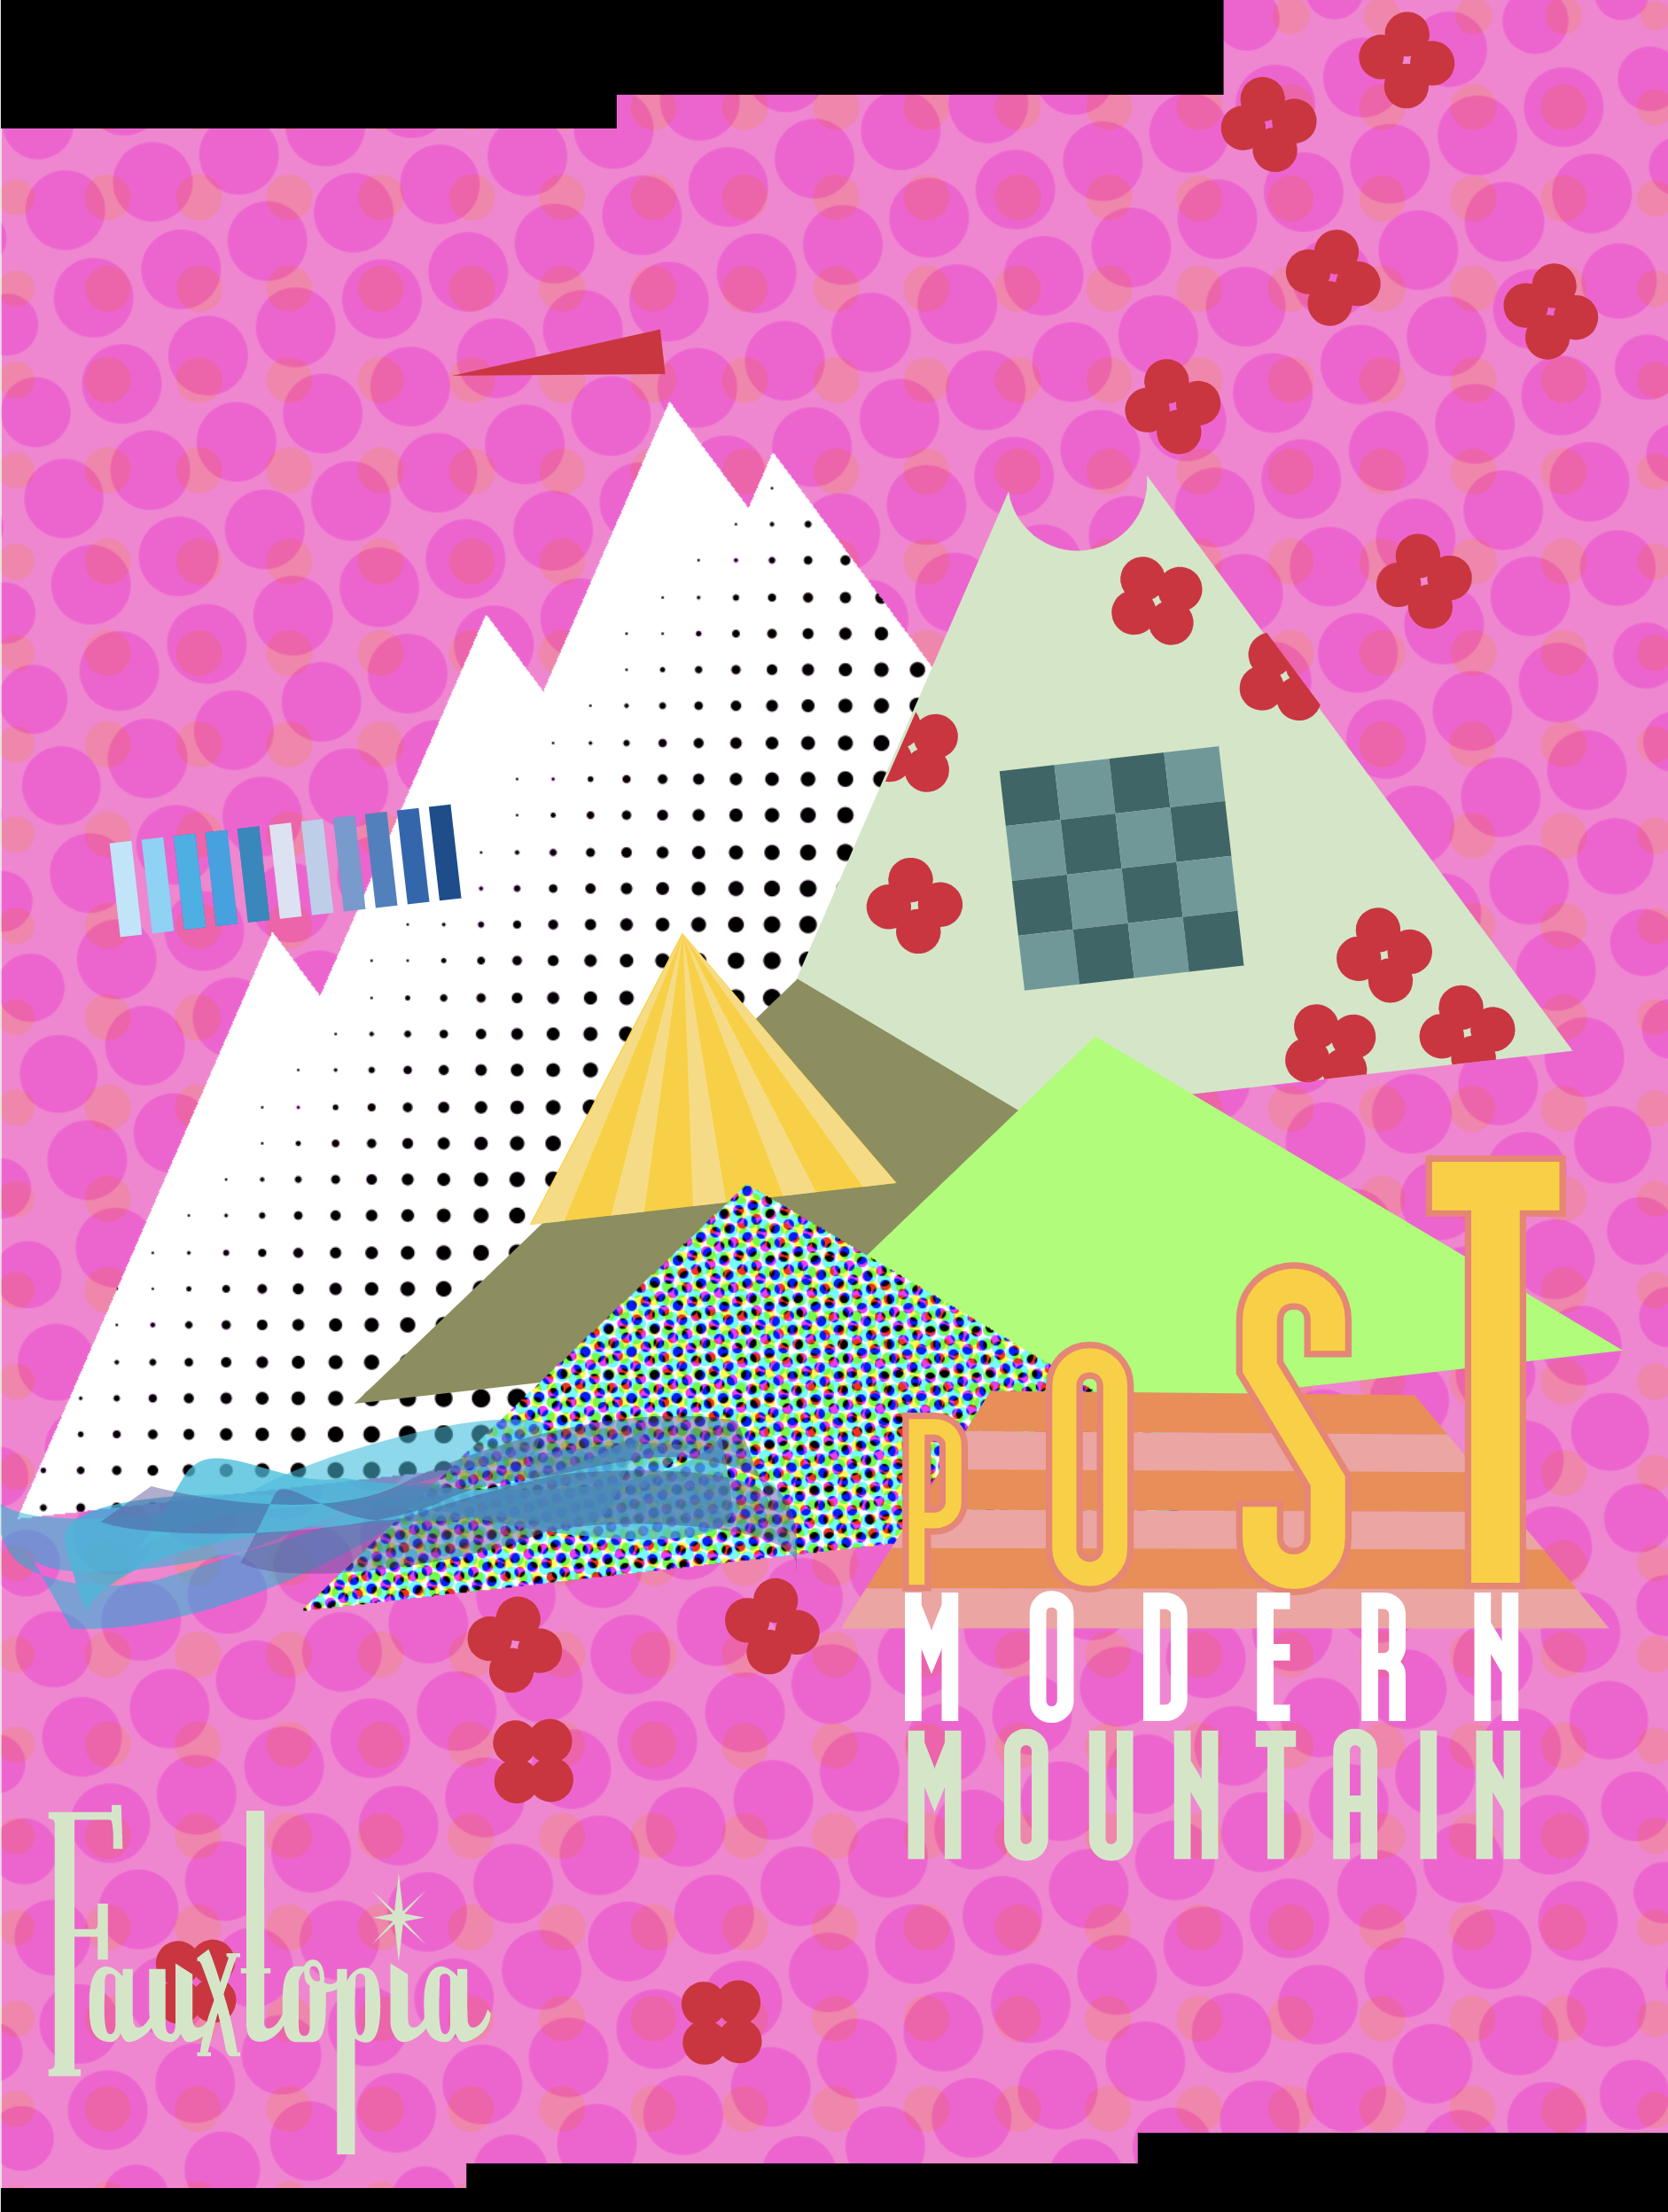 Majority Pink background with multiple mountain graphics and text "Post Modern Mountain"